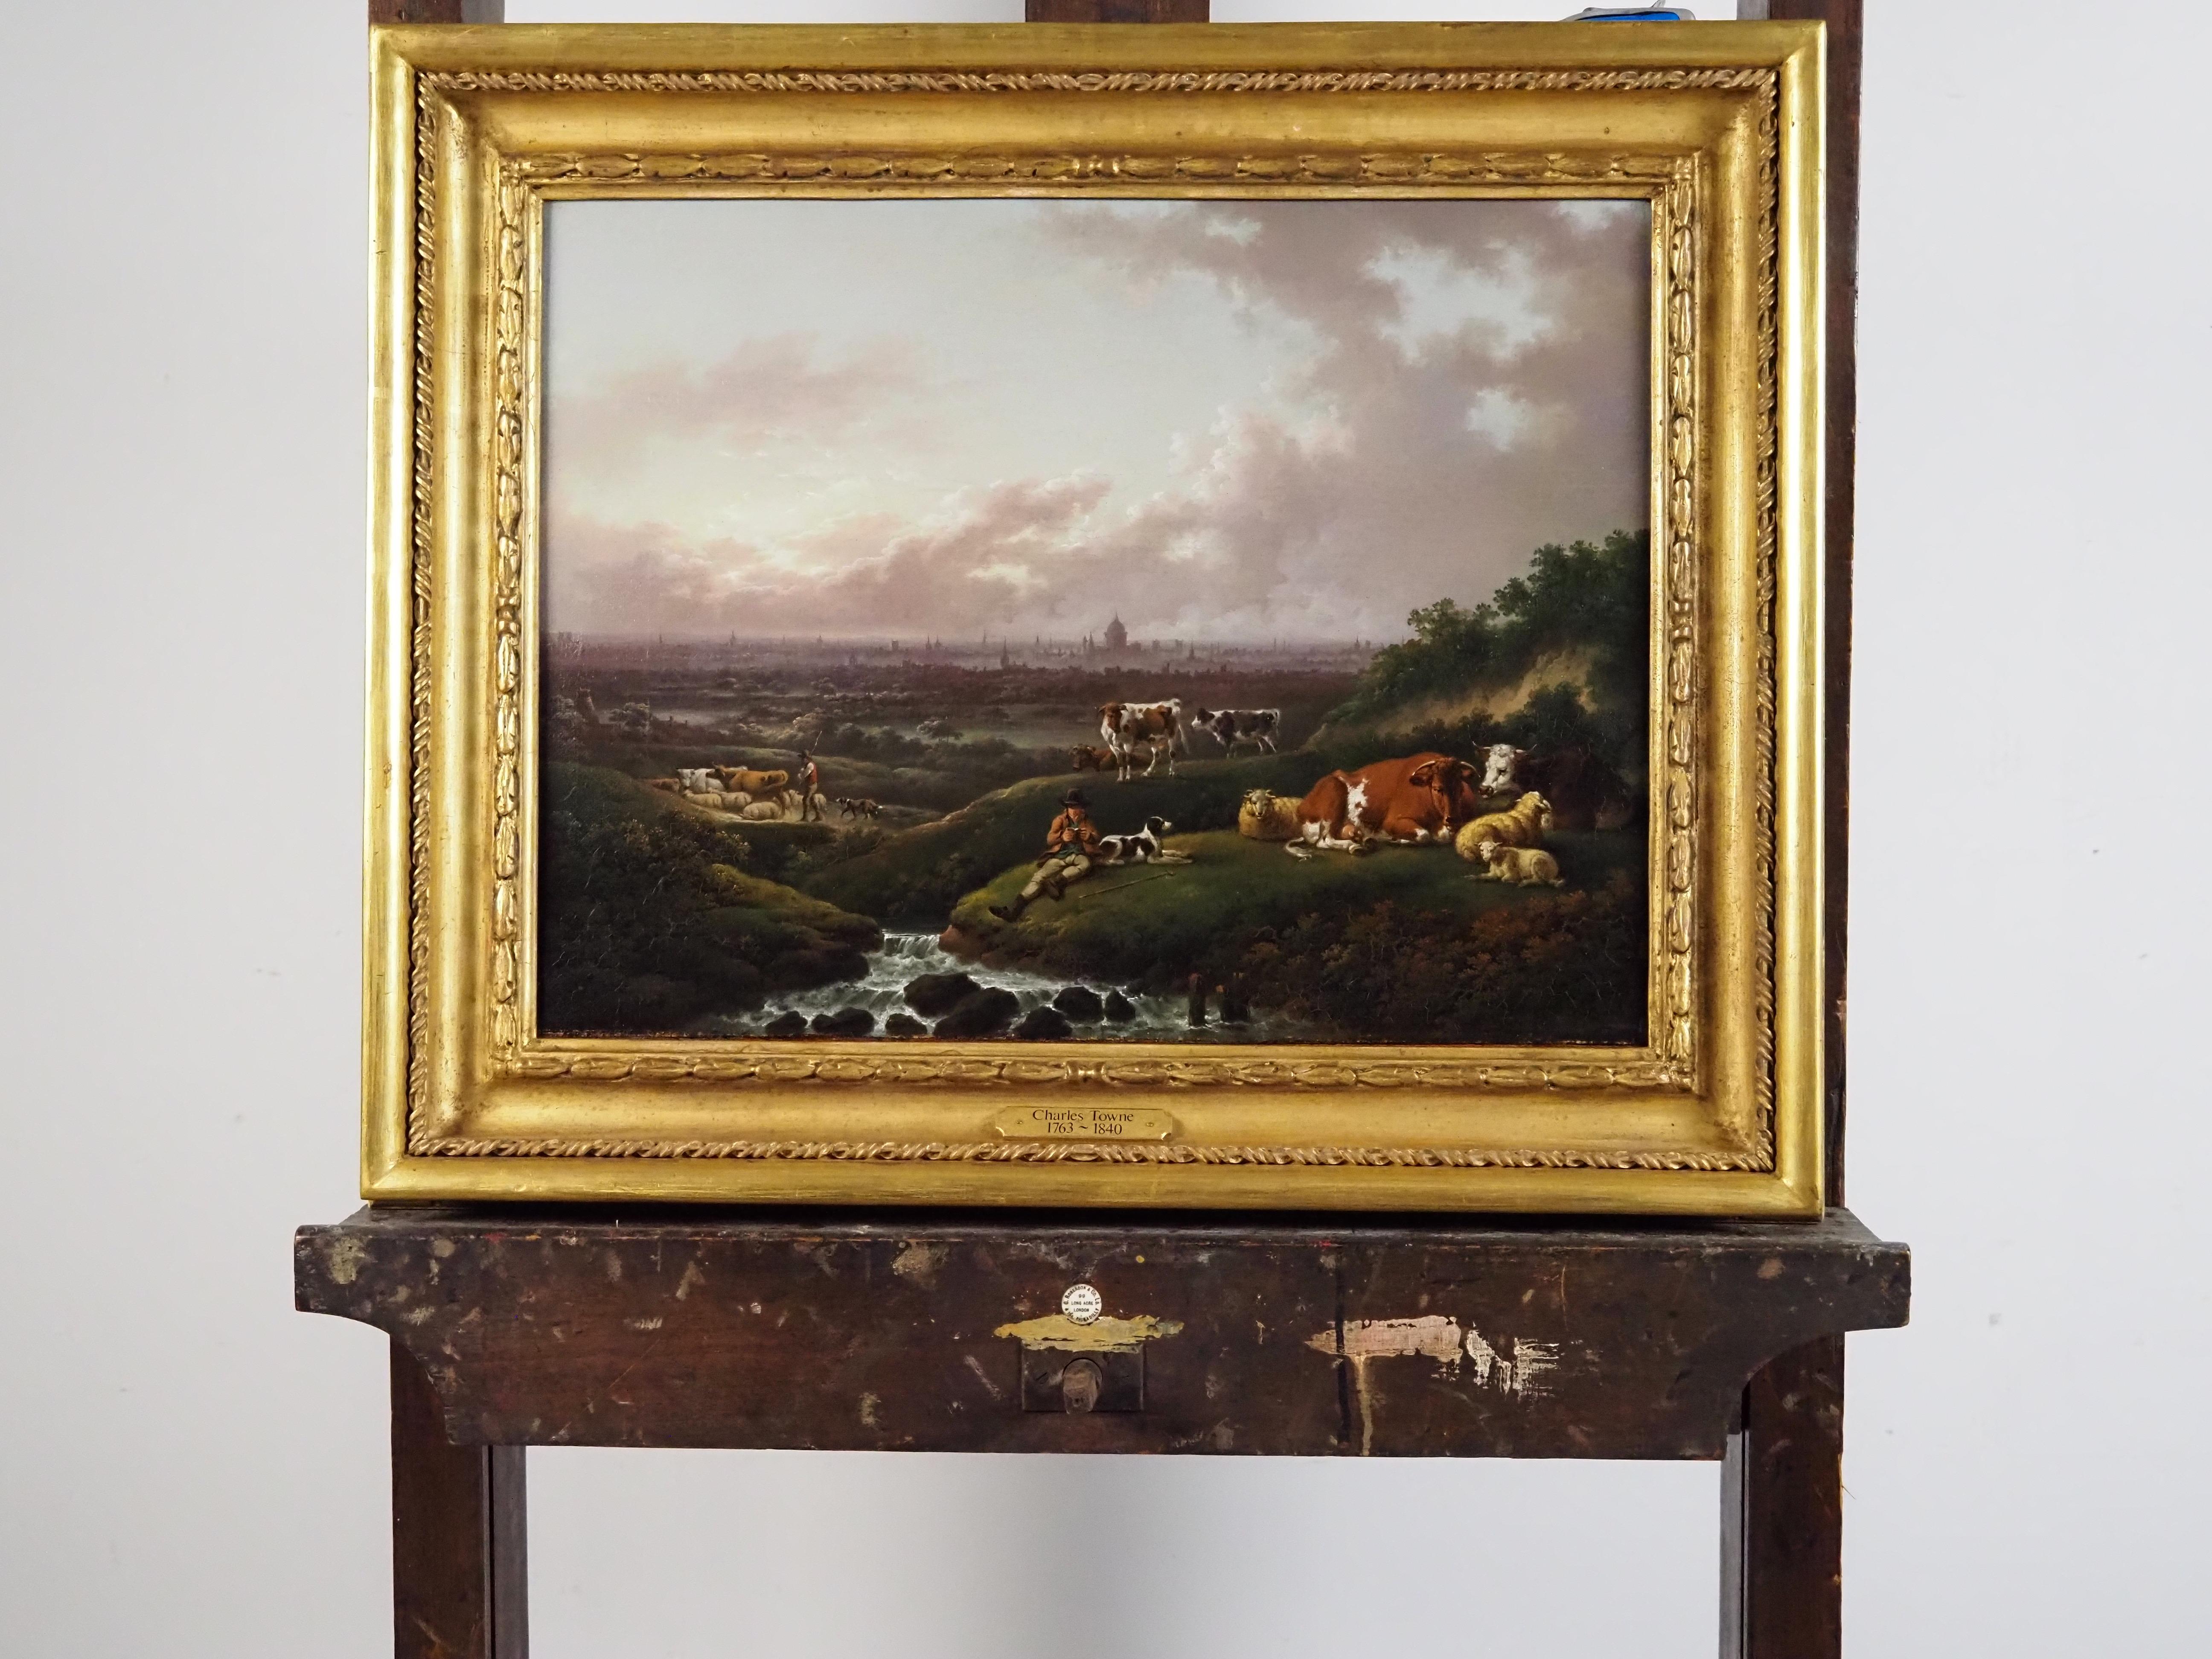 Charles Towne (1763-1840)
London : A distant view of the city from the south with a herdsman and cattle in the foreground
Oil on canvas laid on panel
Canvas Size - 14 1/2 x 19 in
Framed Size - 19 x 24 in

Provenance
Sale, Christie's London, 12th